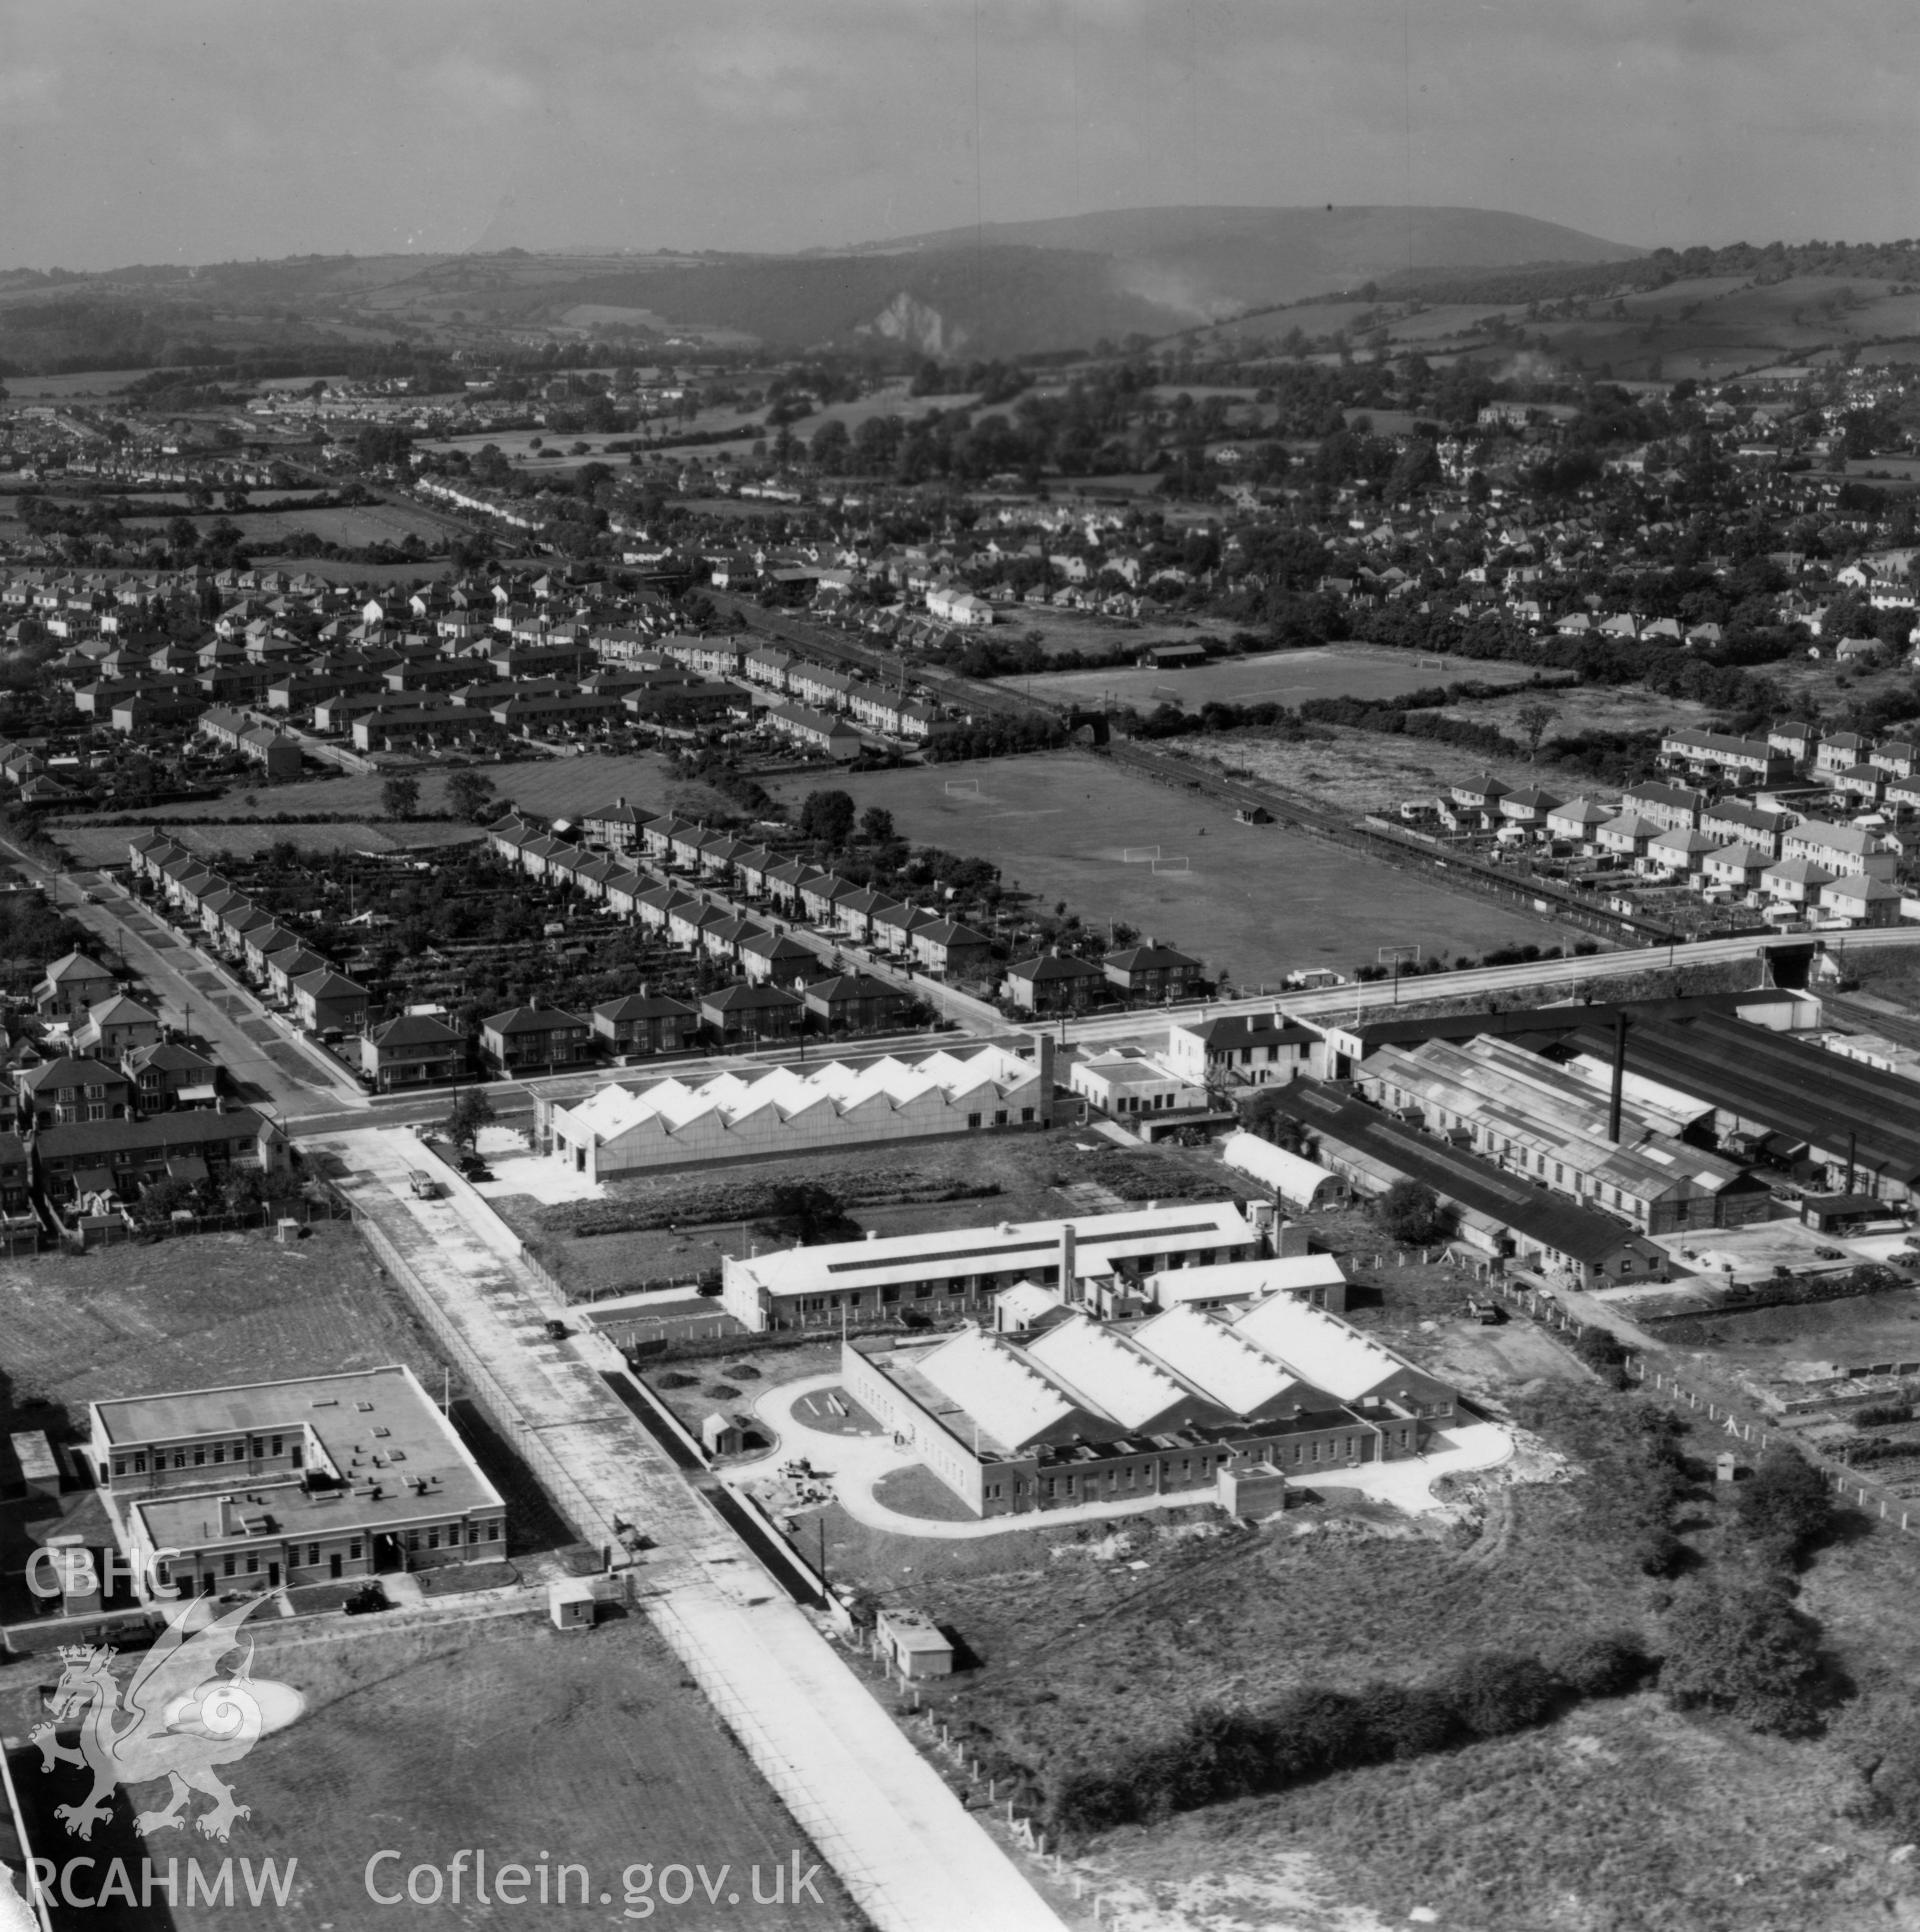 General view of factories and government buildings including the RO factory and new Inland Revenue buildings at Llanishen. Oblique aerial photograph, 5?" cut roll film.